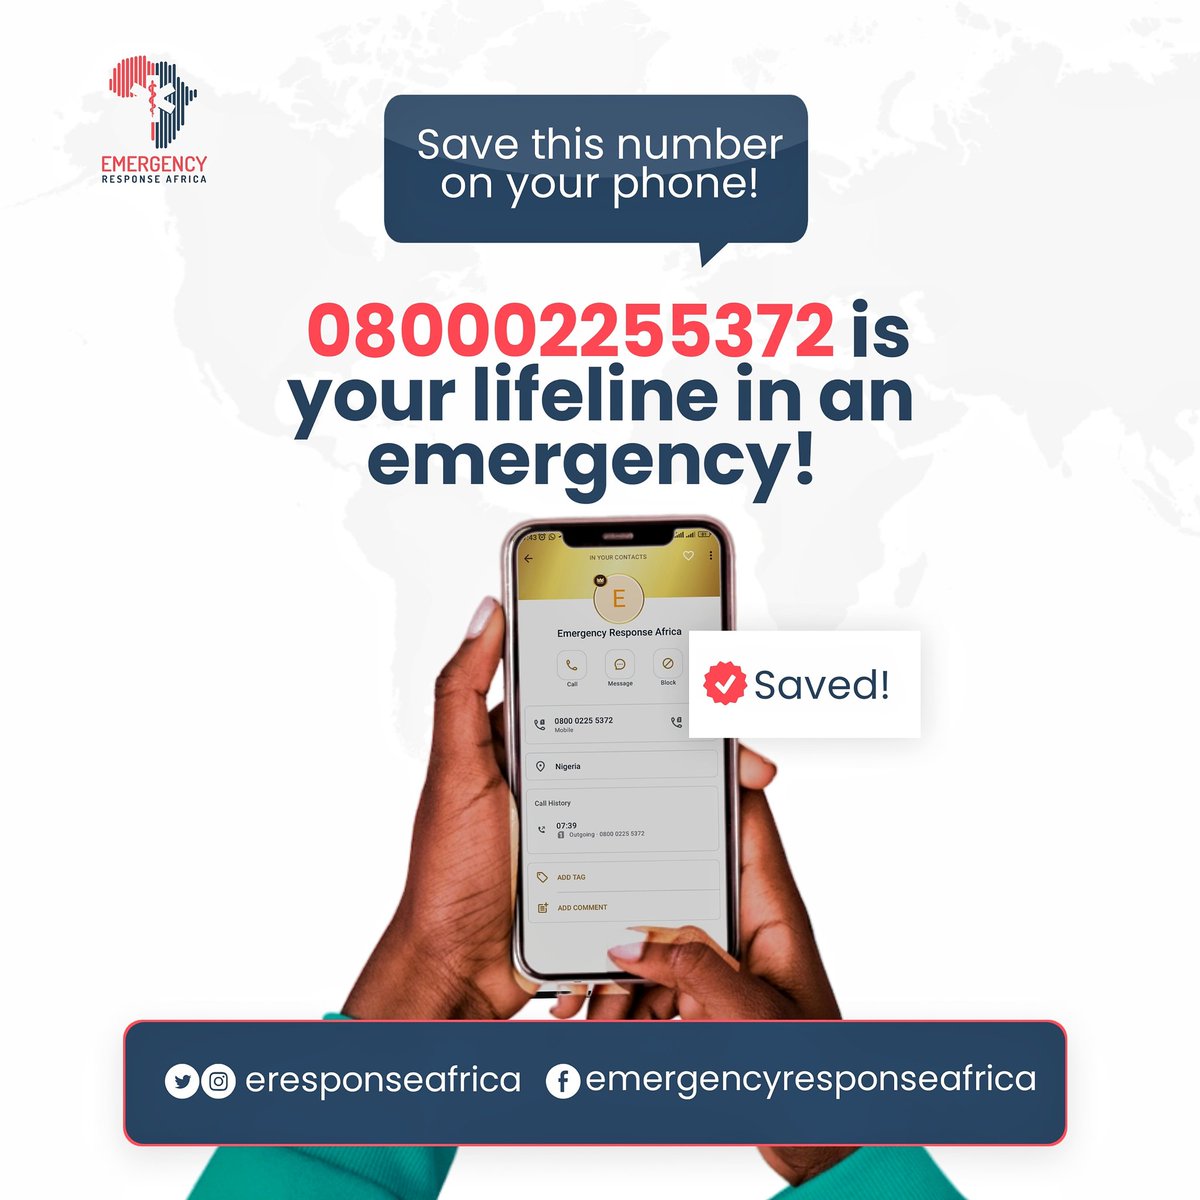 In case of an emergency, don't hesitate to call!  We're here to help you get the care you need, fast. 

#emergencynumber #emergencyresponseservices #emergencycontact #EmergencyPreparedness 

Share this post with your friends and family so they know who to call in an emergency! ➡️